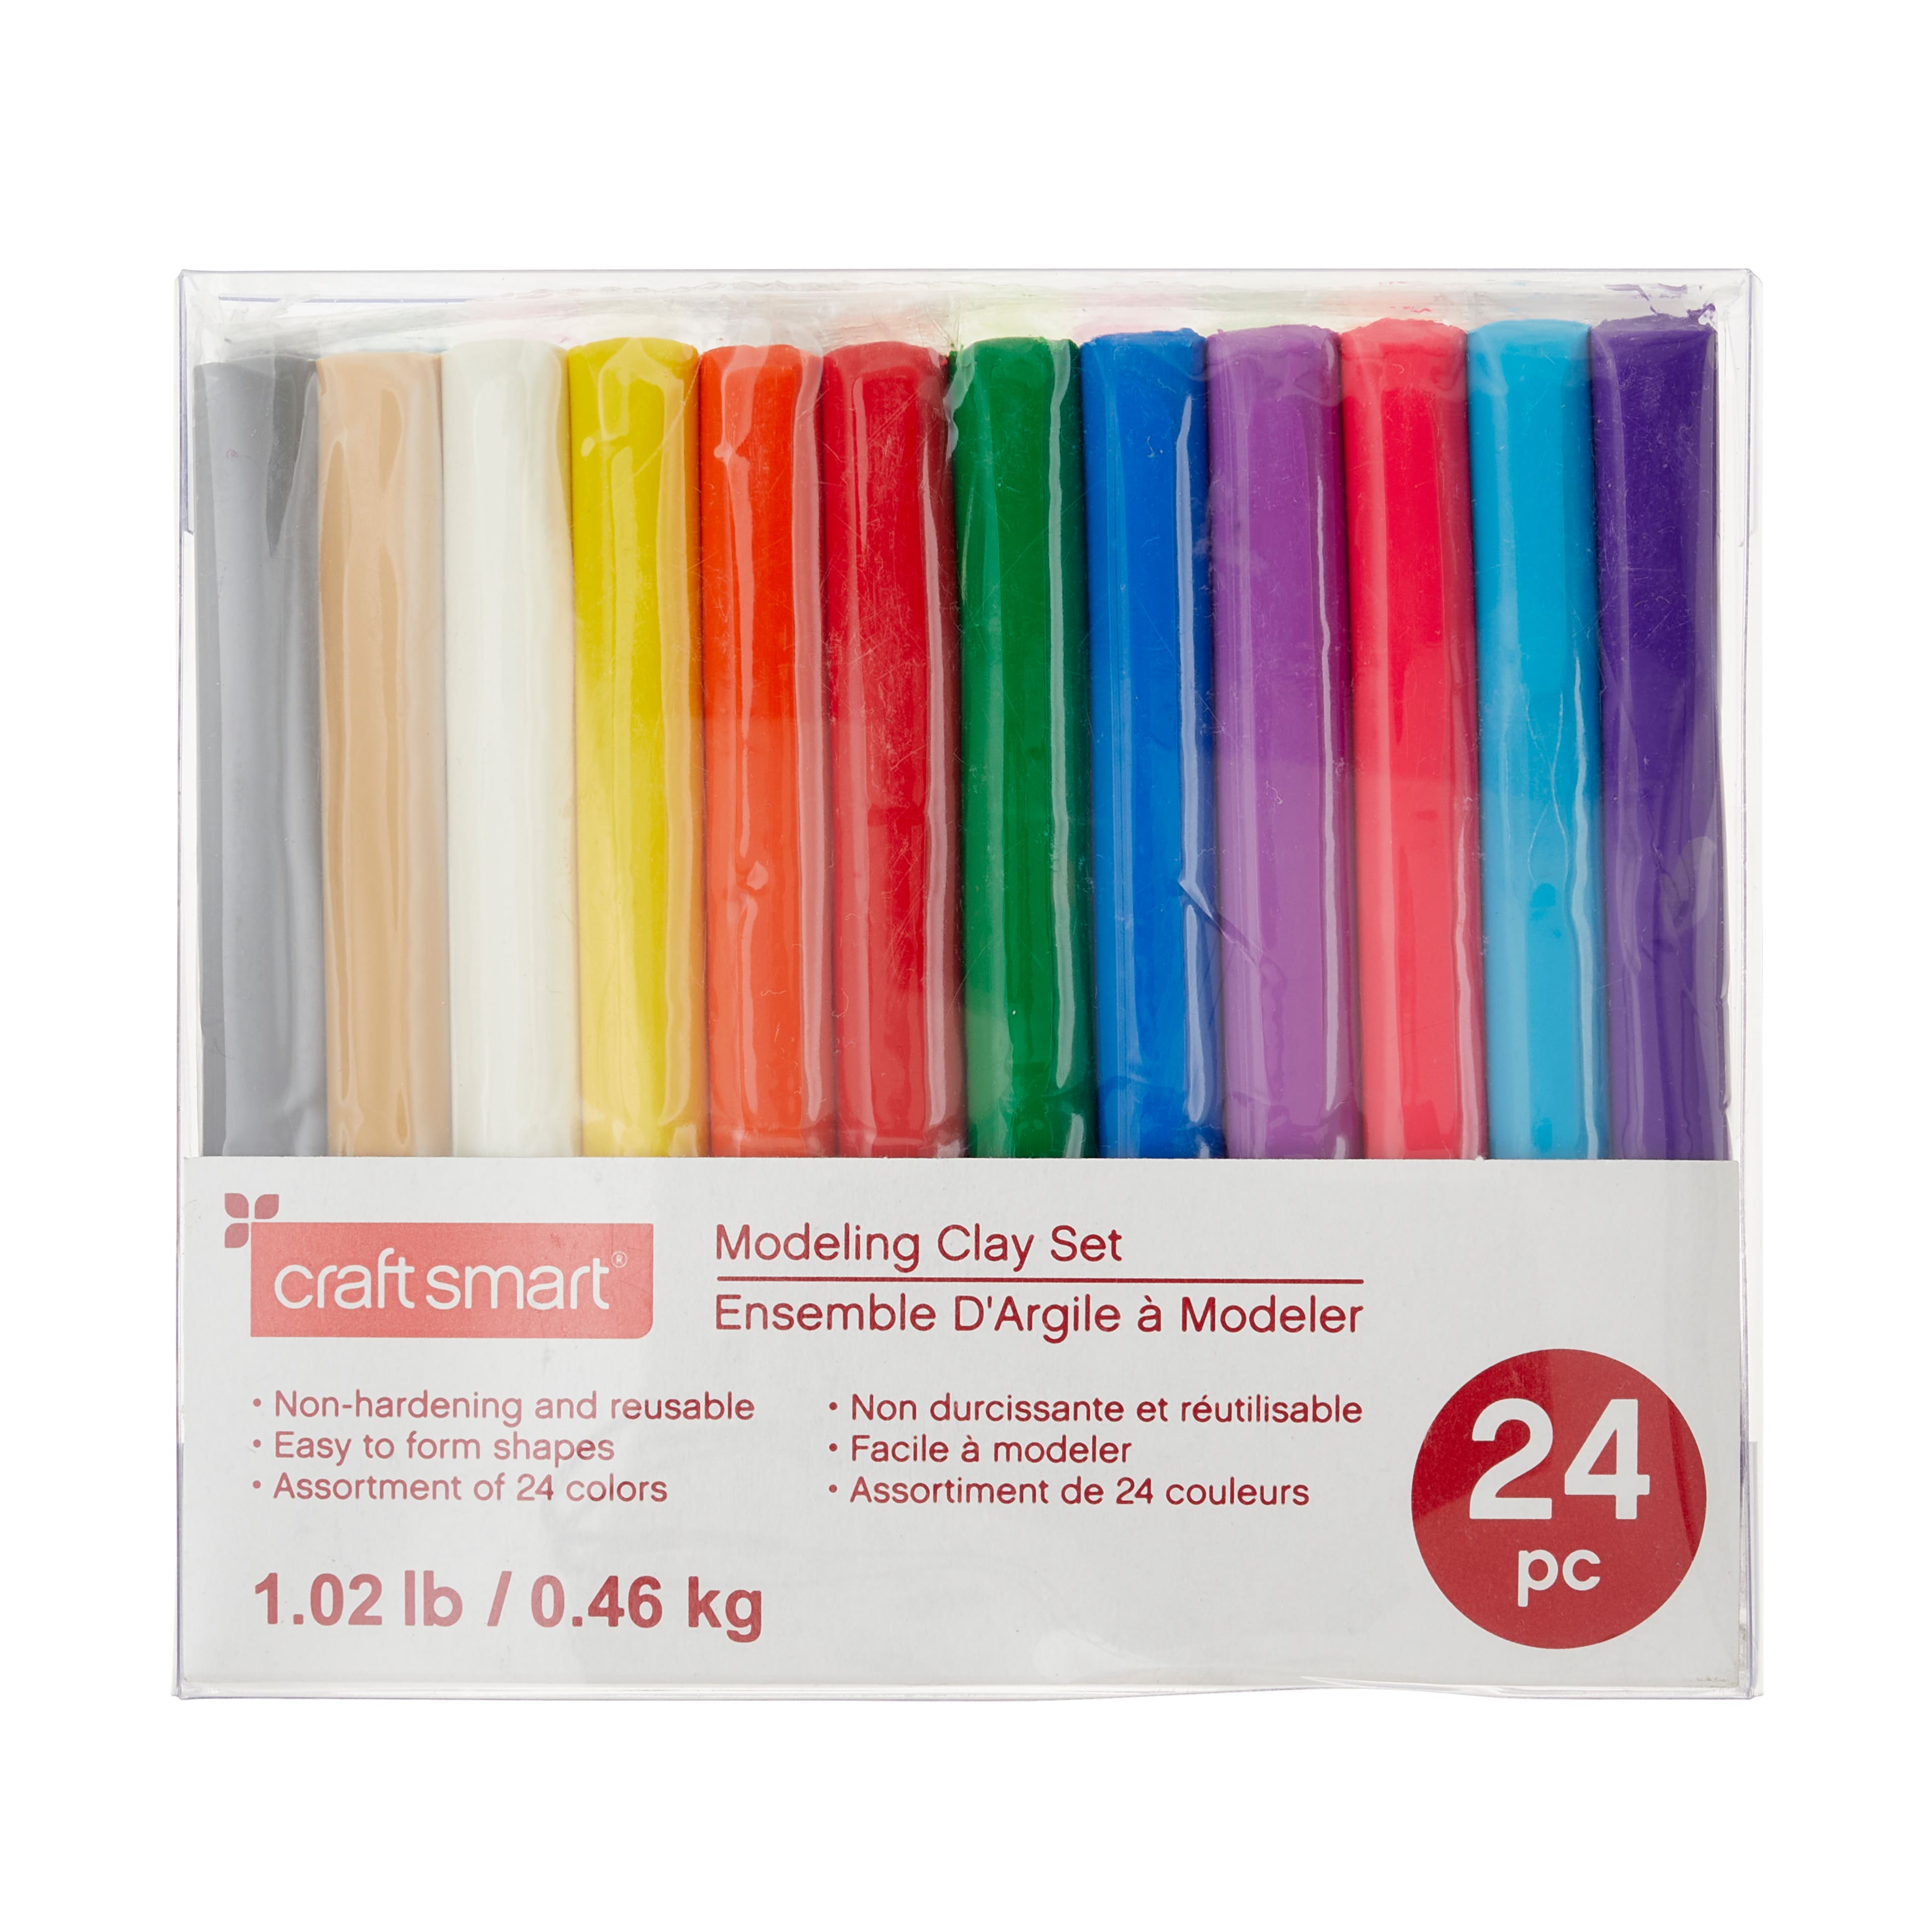 Classic Colors Oven Bake Clay by Craft Smart®